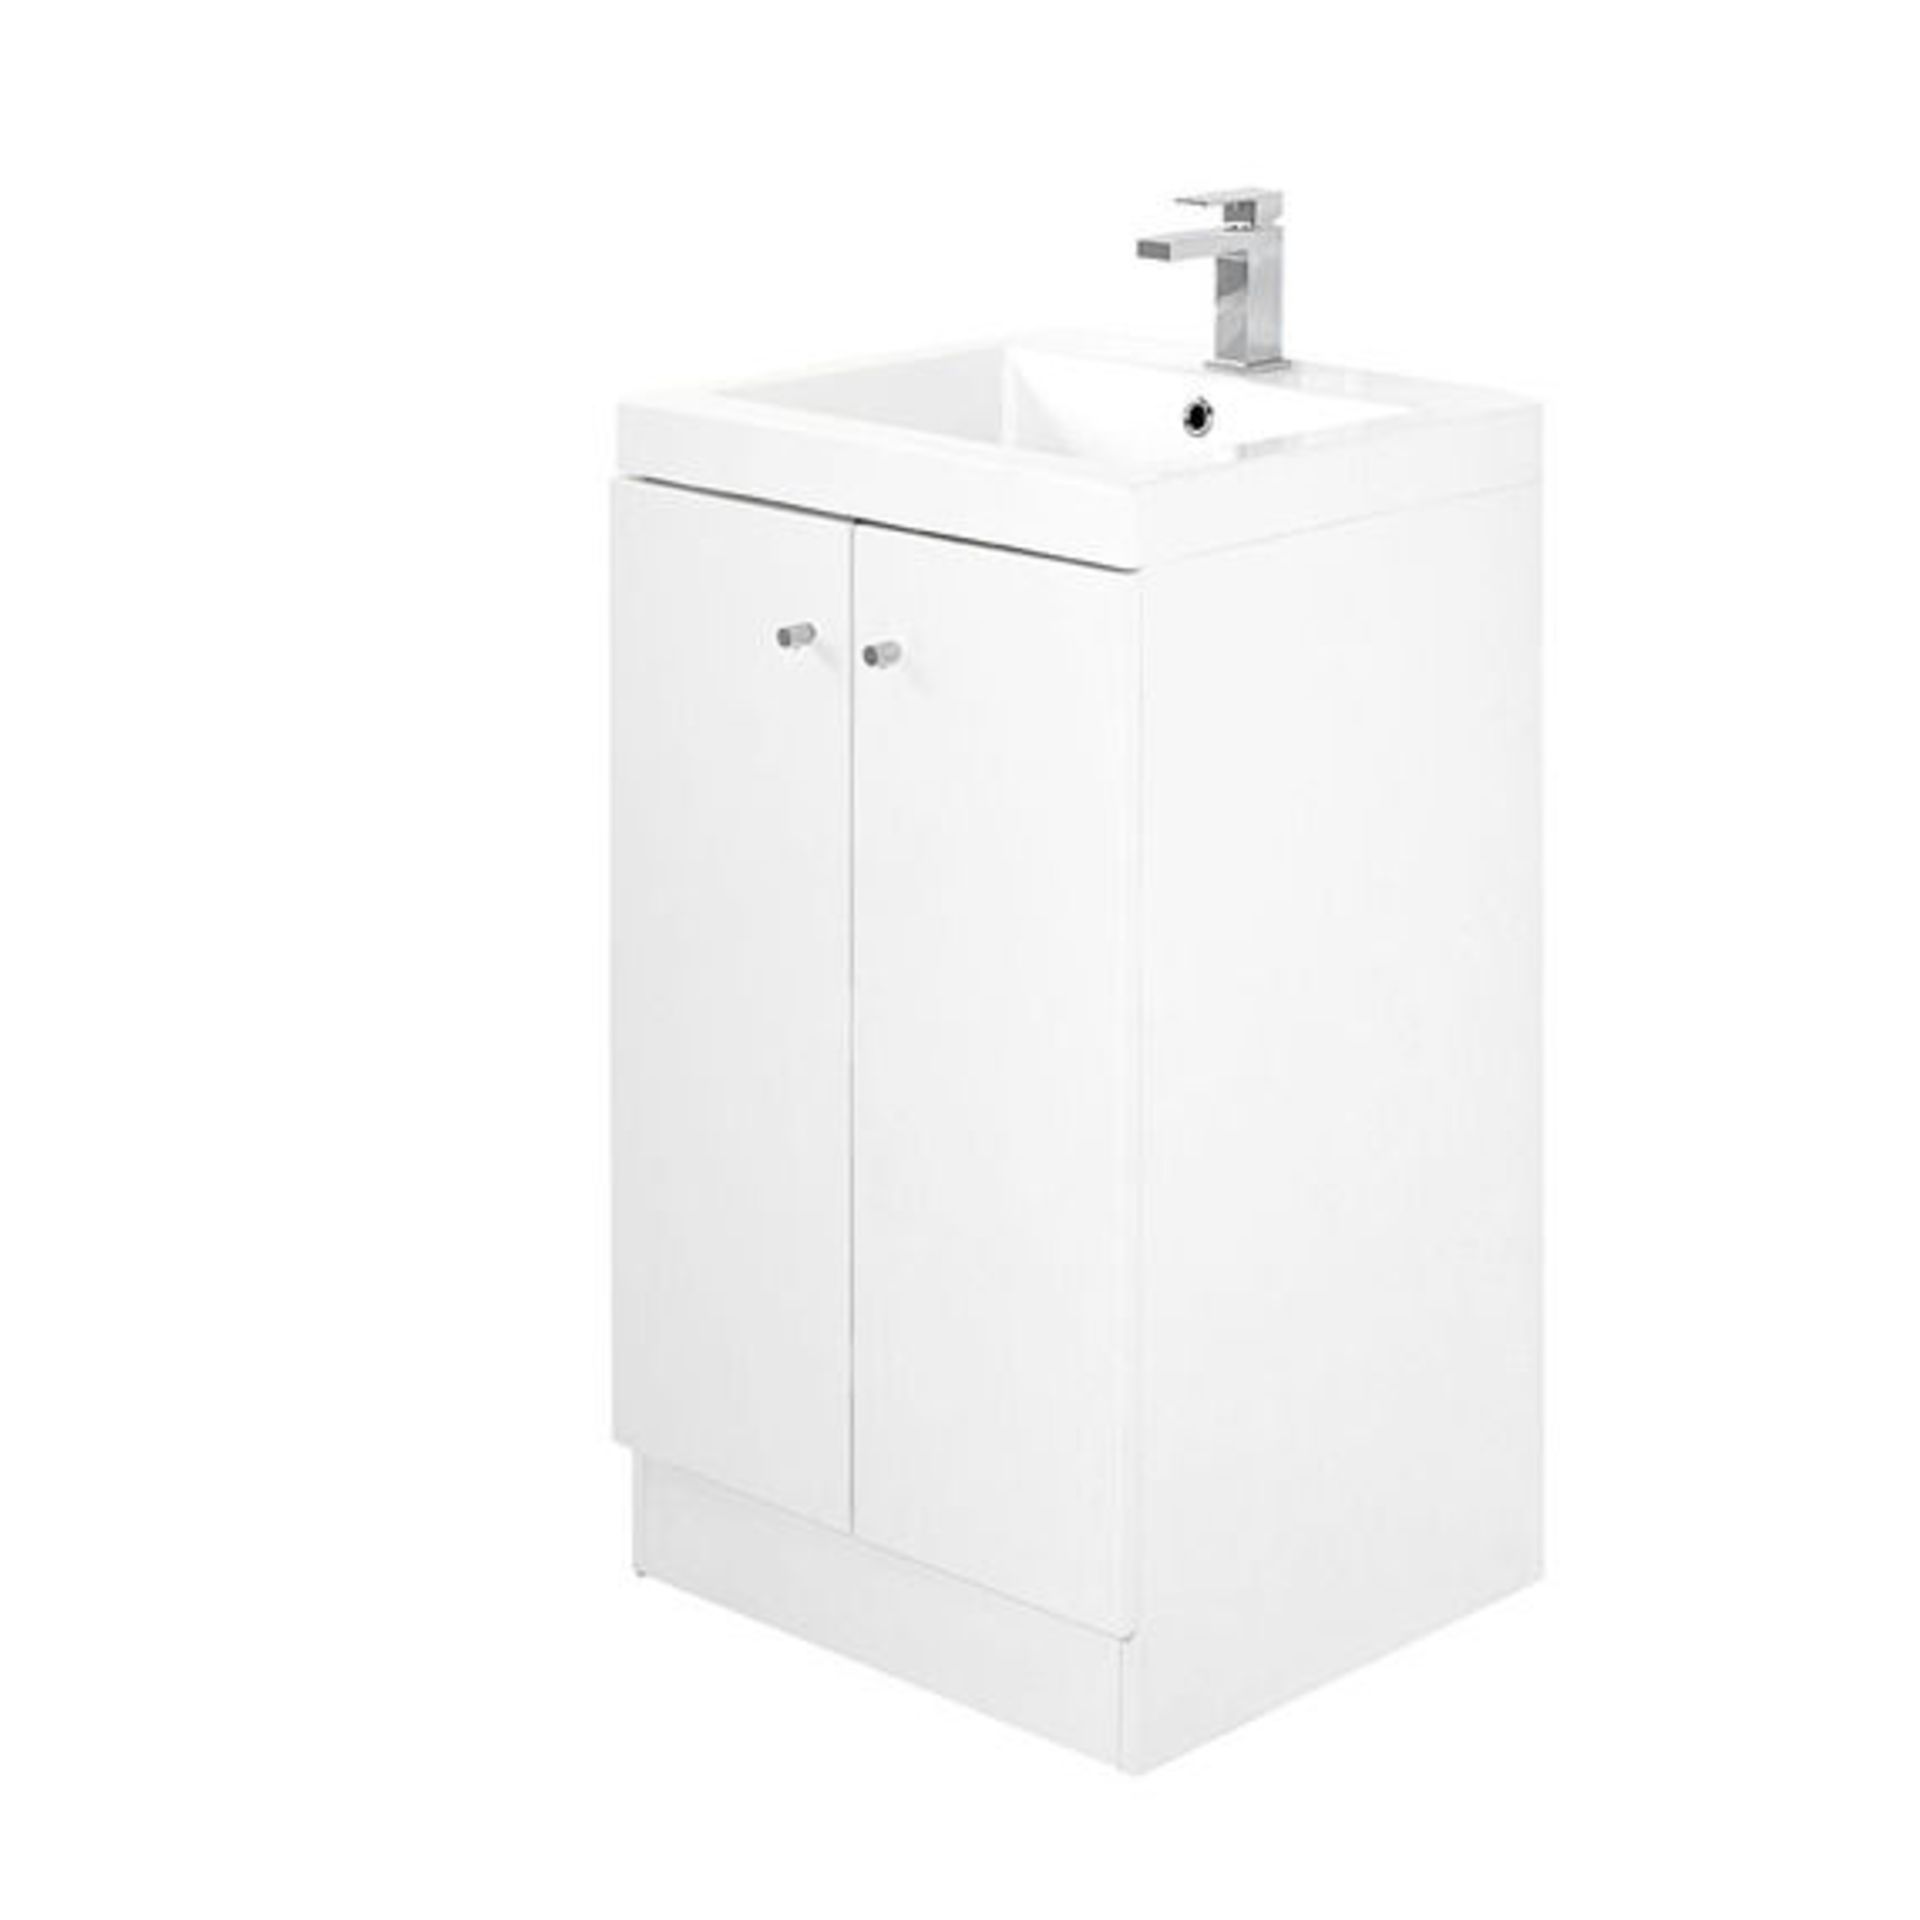 10 x Alpine Duo 500 Floor Standing Vanity unit - Gloss White - Brand New Boxed Stock - Dimensions: - Image 5 of 5